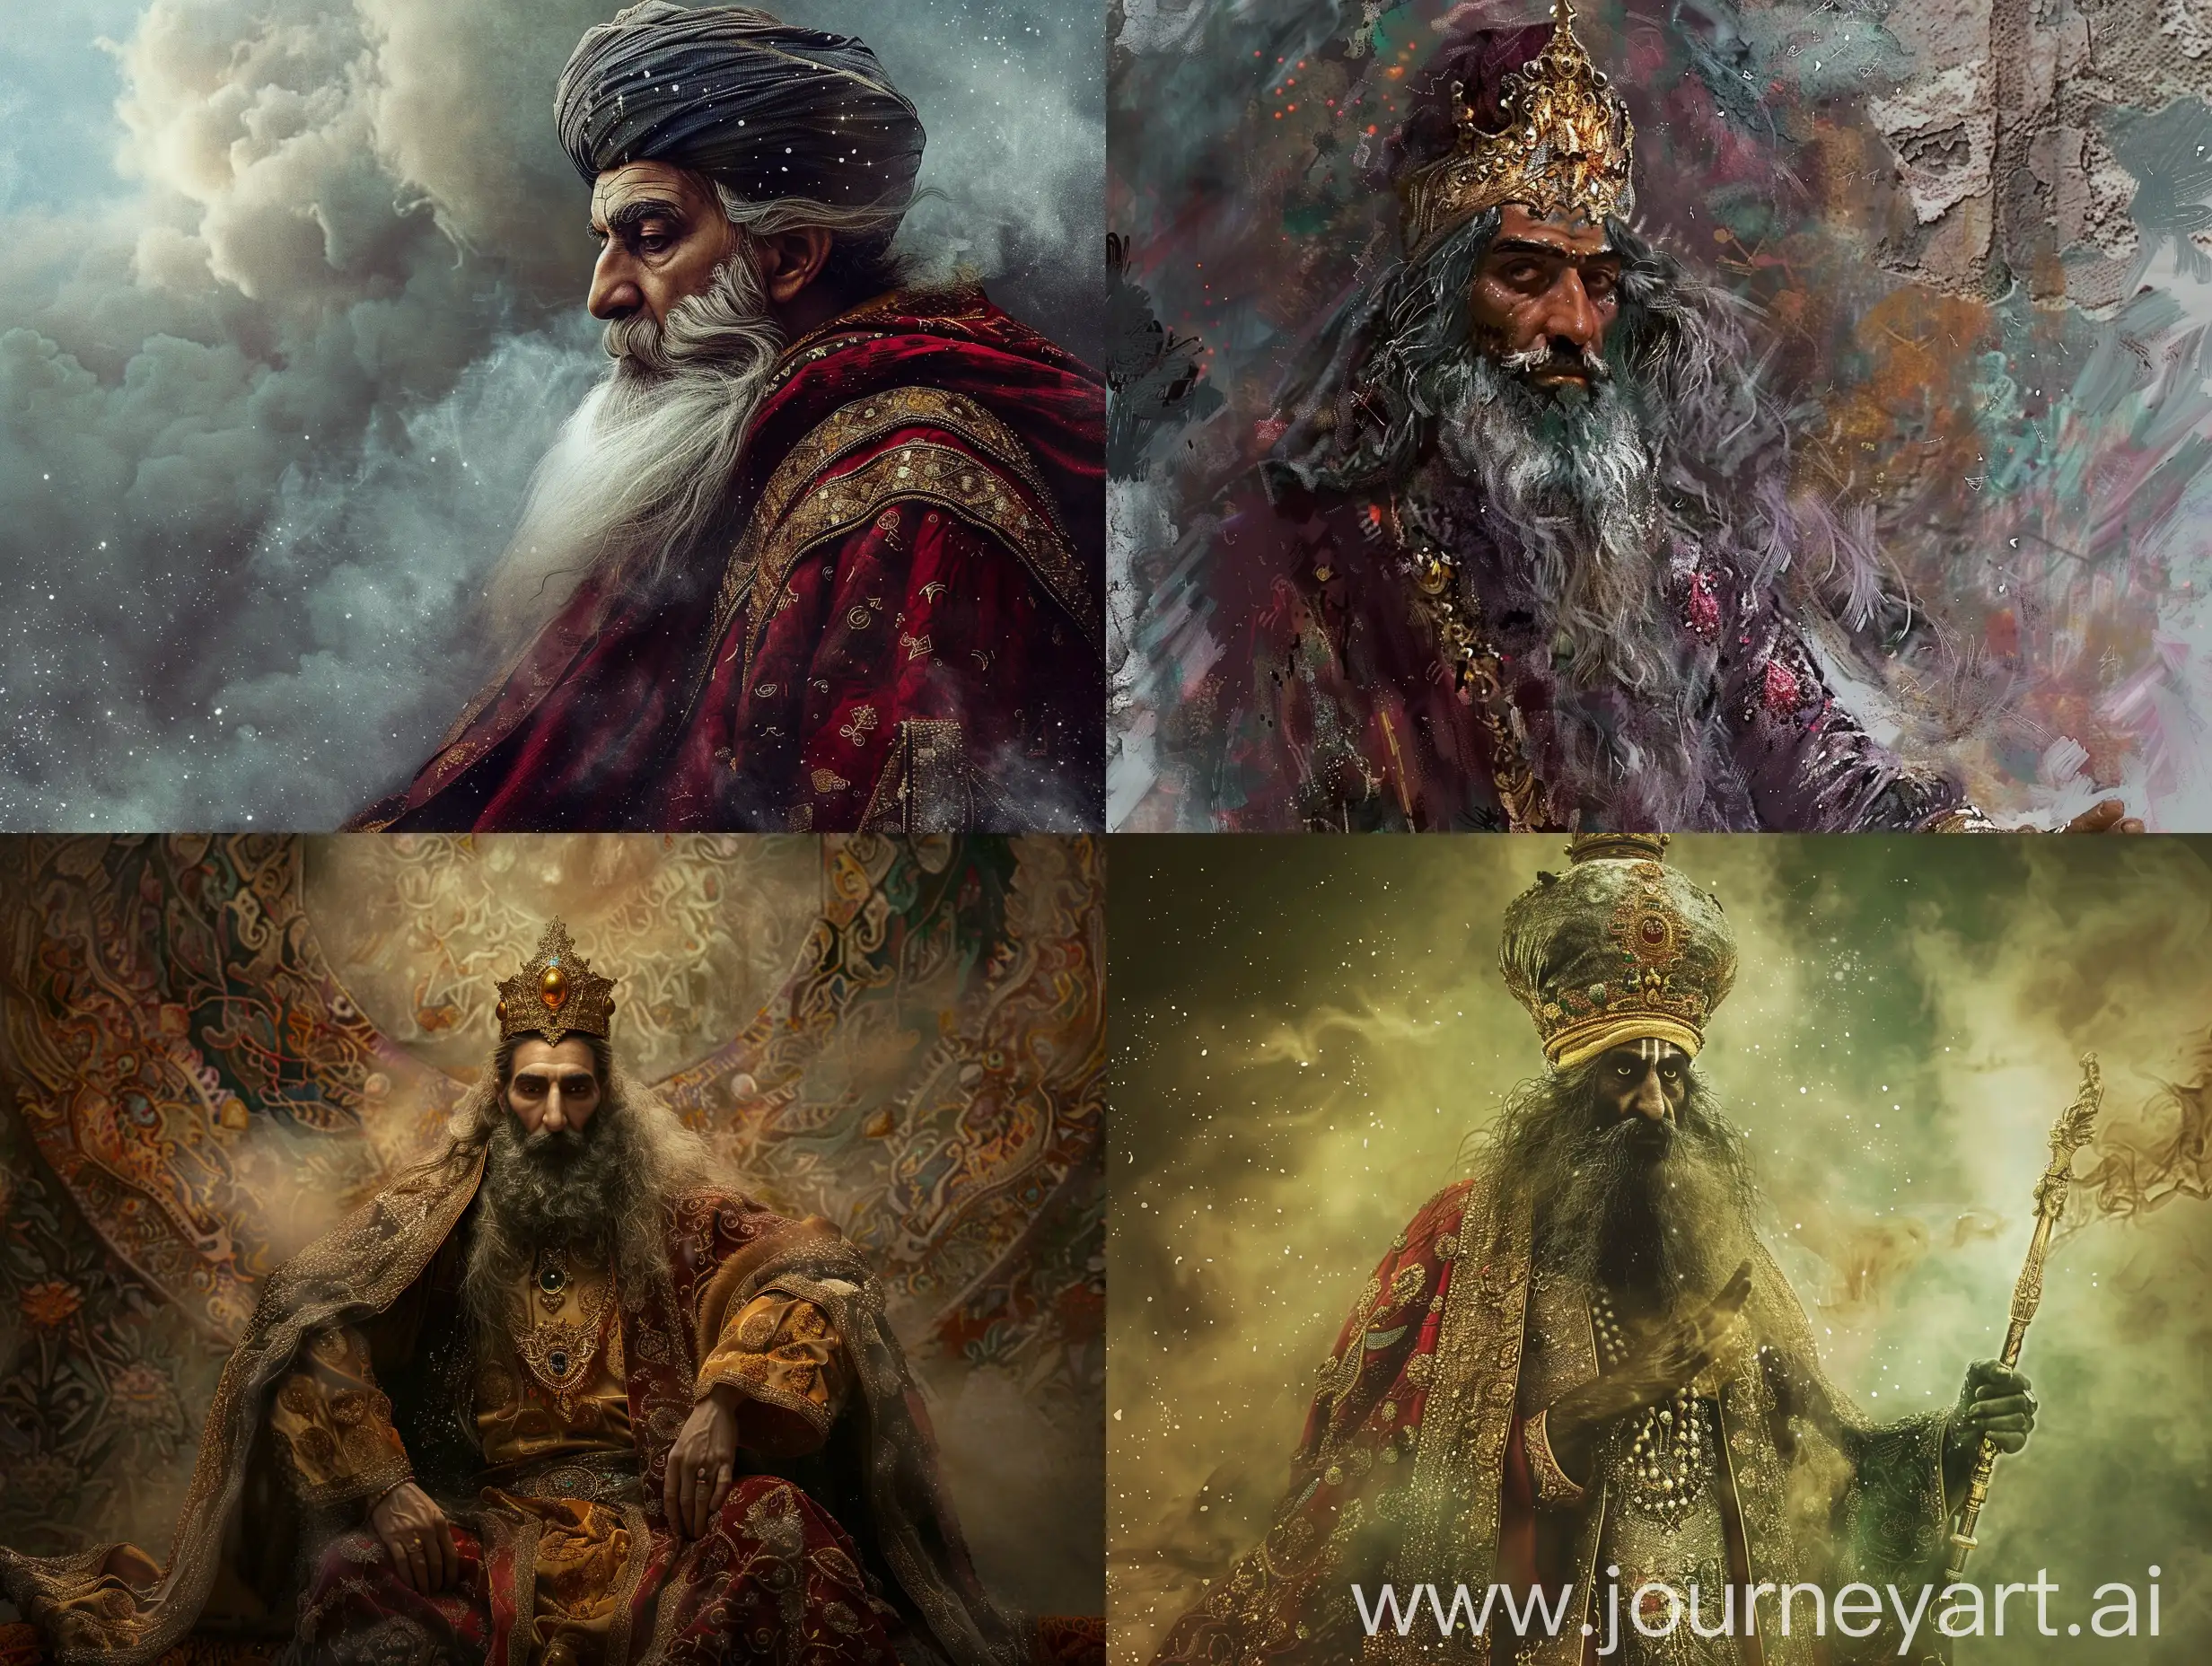 Jamshid, the mythical king of Iran in Ferdowsi's Shahnameh based on my photo, fantasy, magical, mysterious picture

https://s8.uupload.ir/files/img_20240322_195931_937[1]_puyj.jpg